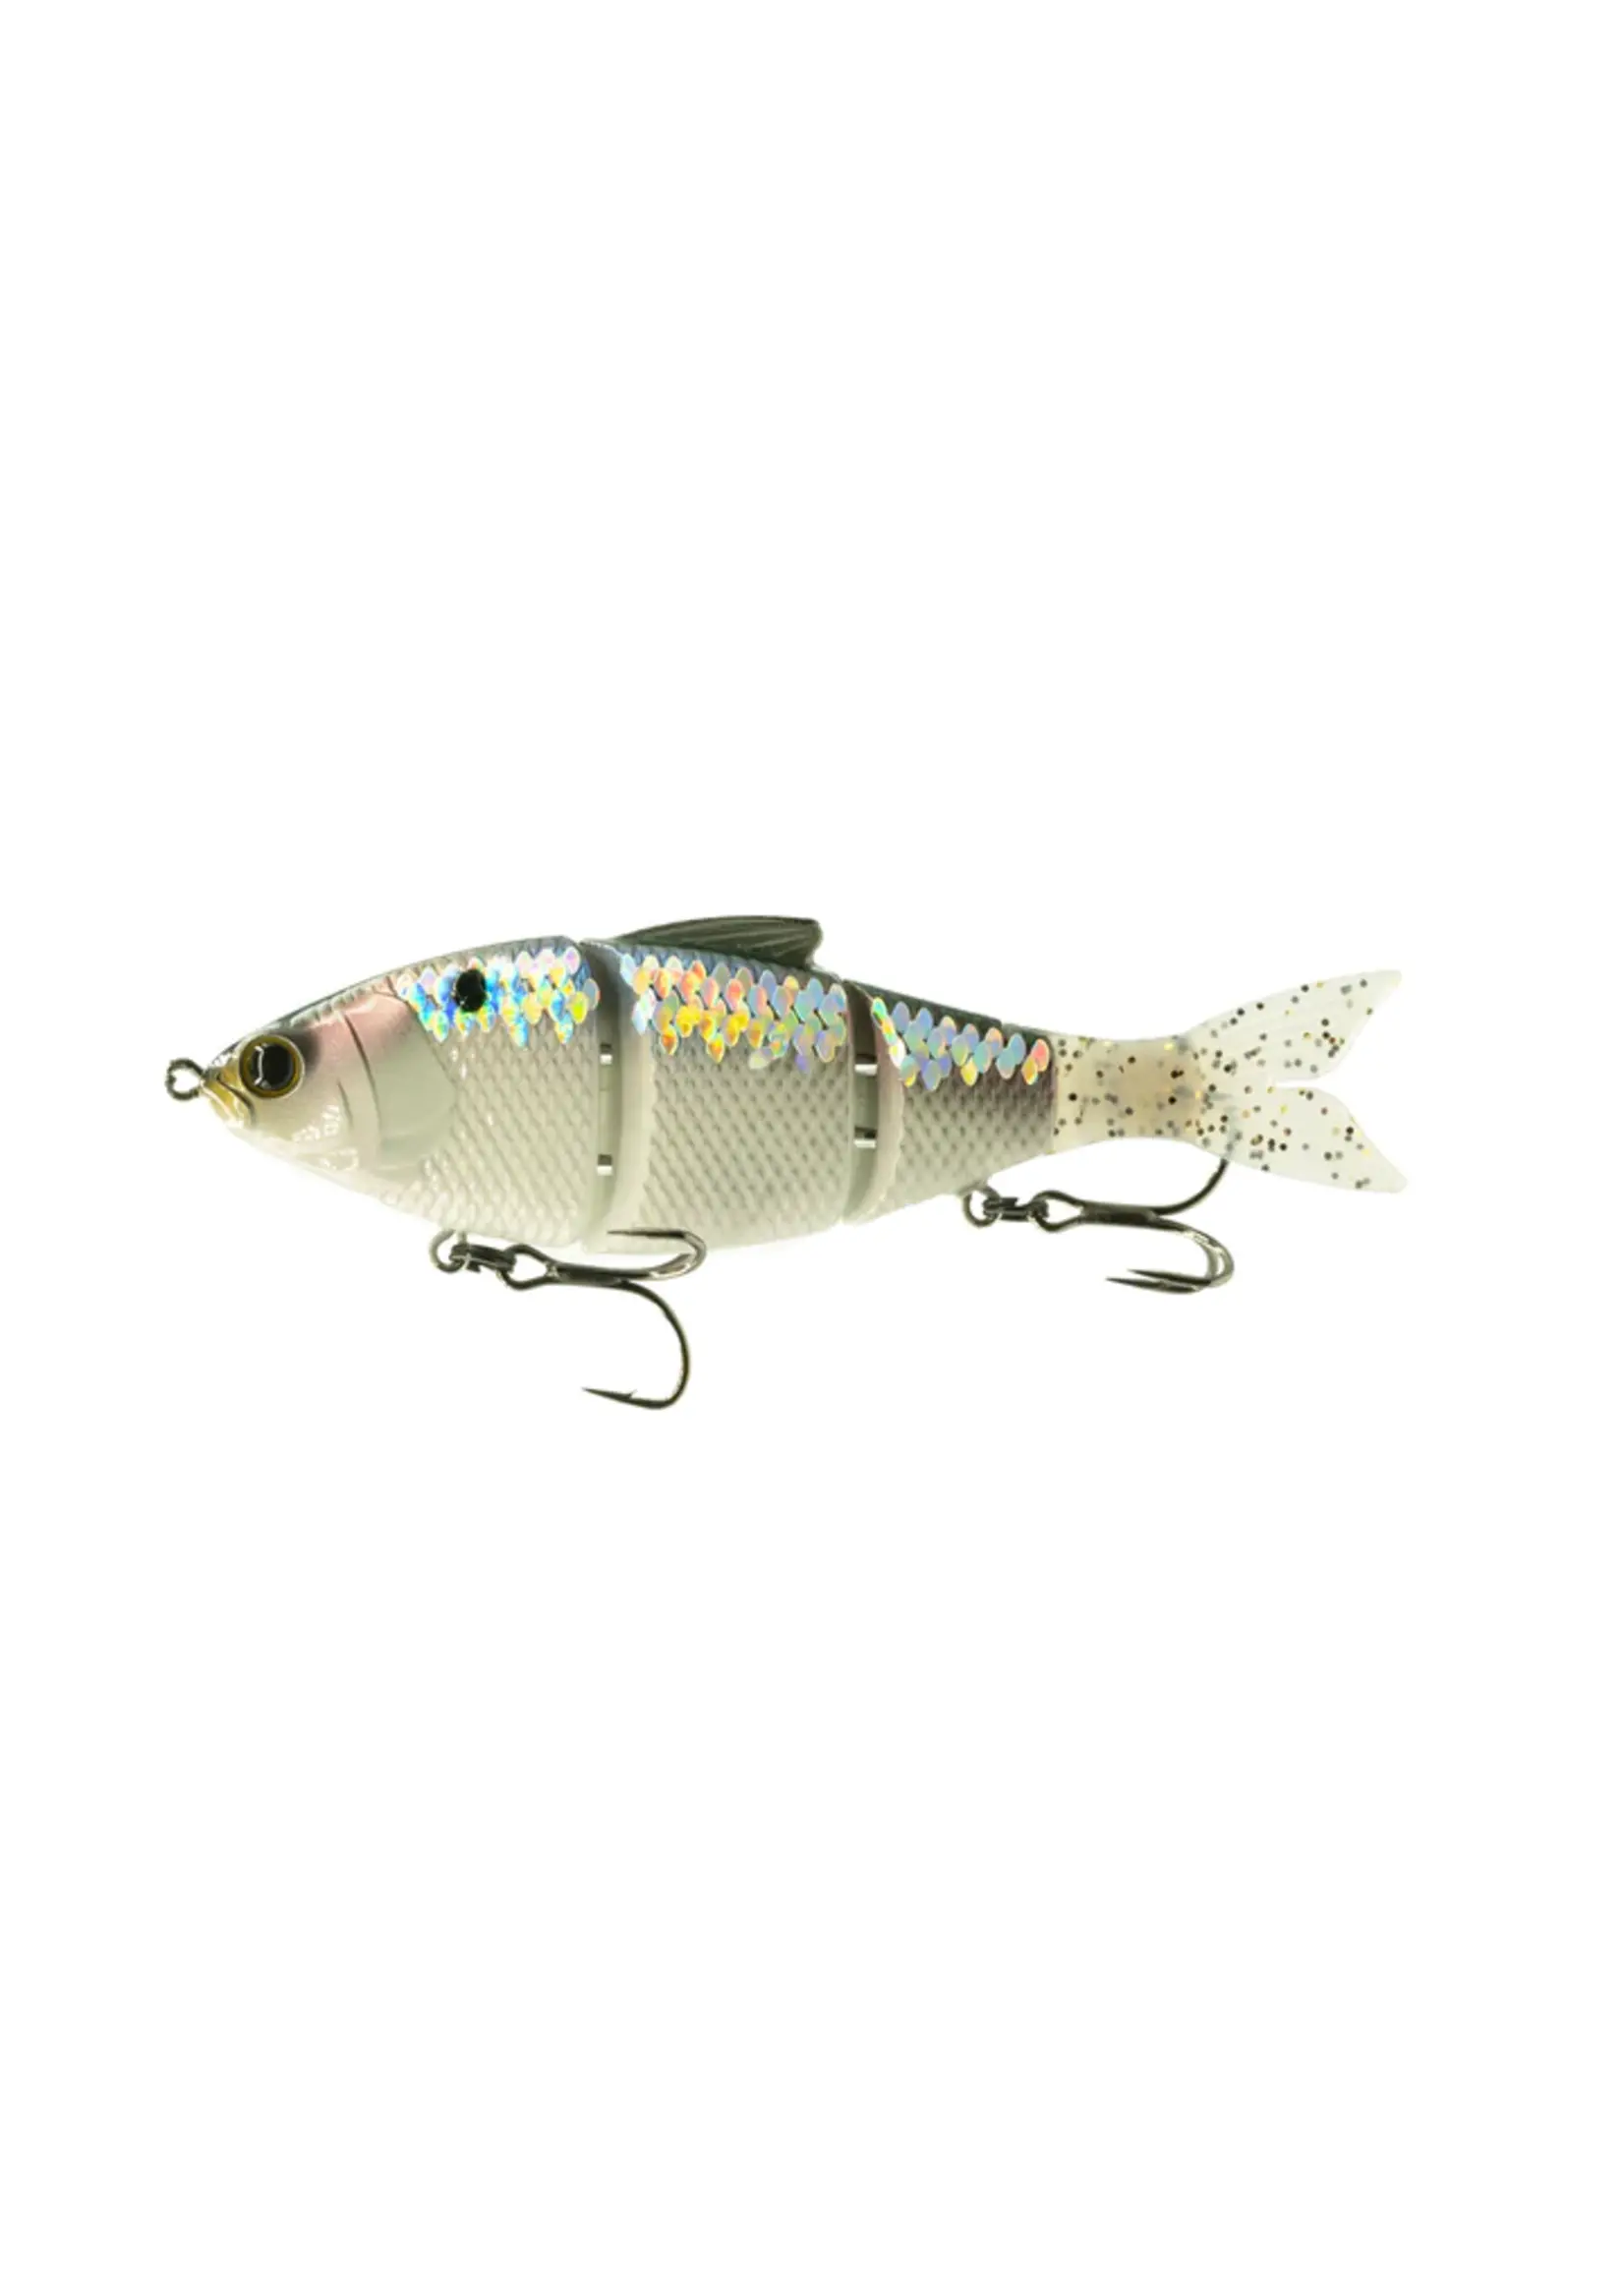 6th Sense Trace 5 Swimbait - Shad Scales Slow Sink - Brothers